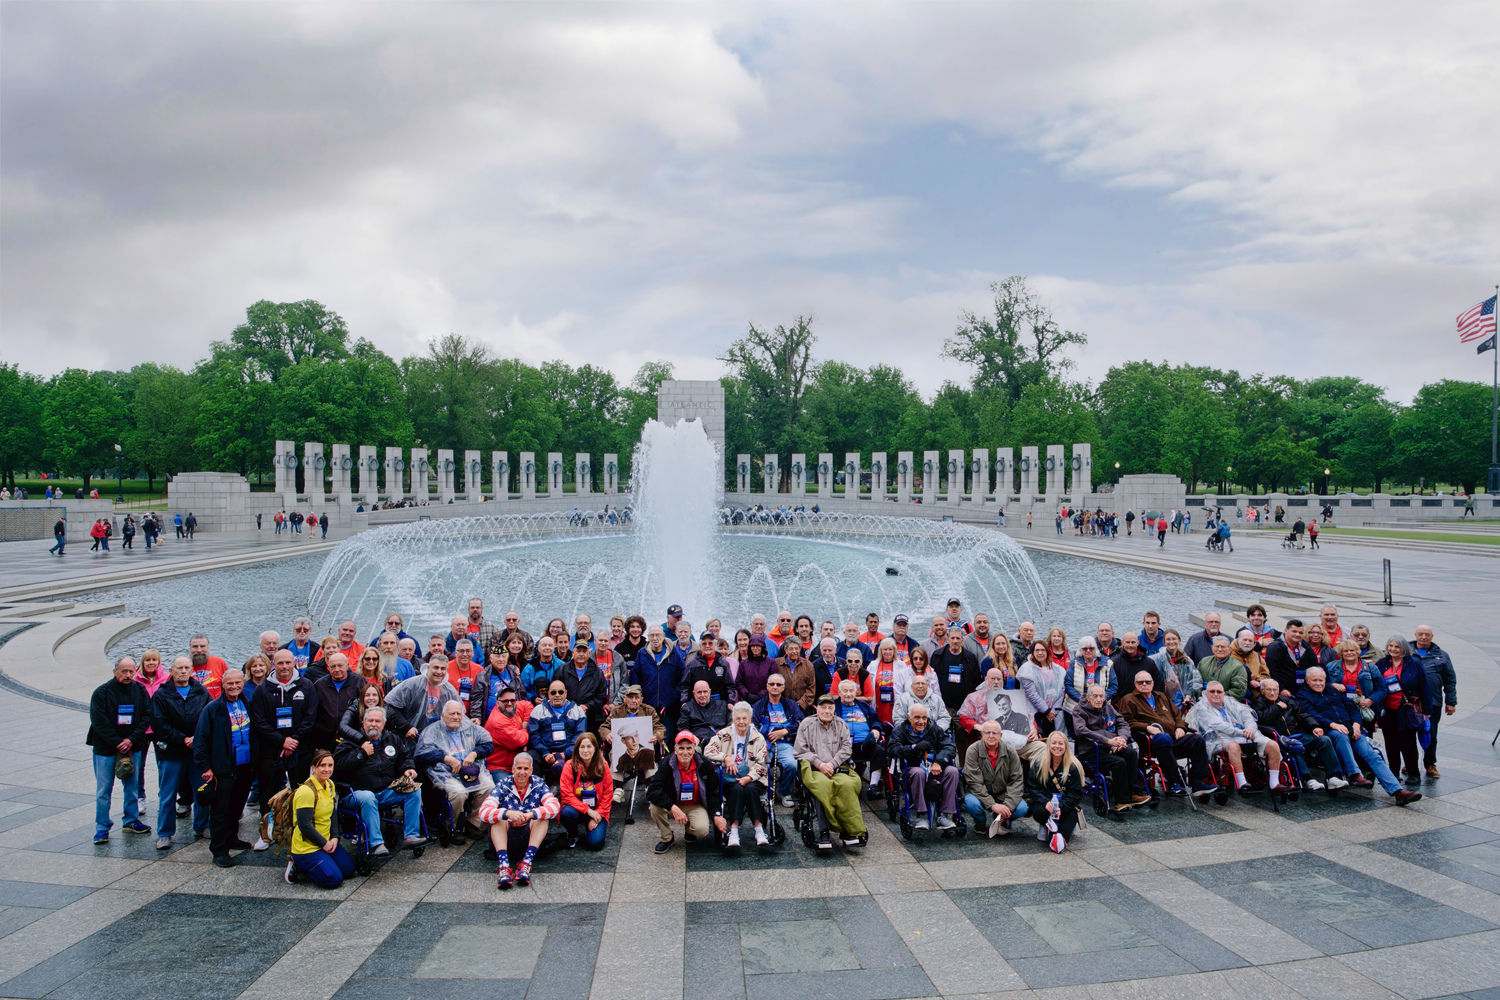 Honor Flight Long Island brought 46 veterans and their guardians to visit their military memorials in Washington, D.C. last Saturday. MARK CHAMBERLAIN